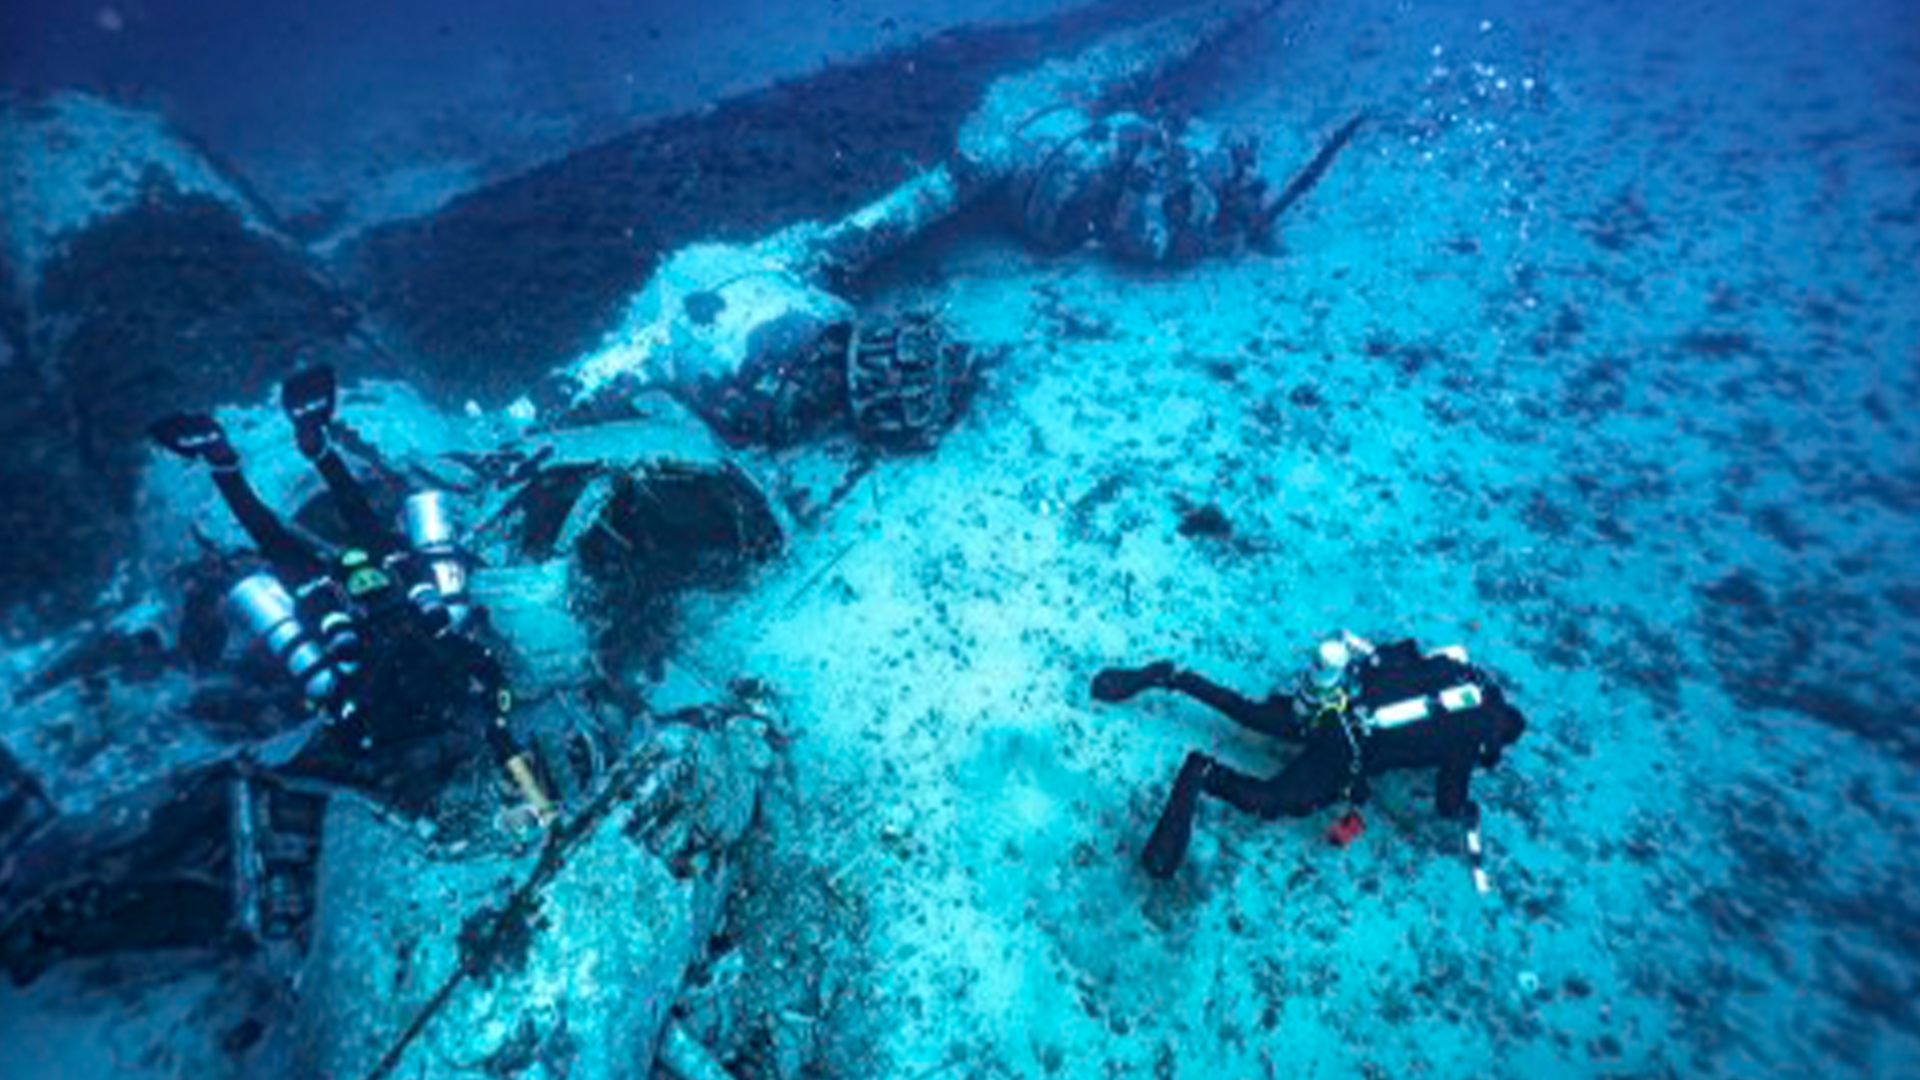 Two divers examine the wreck under water.